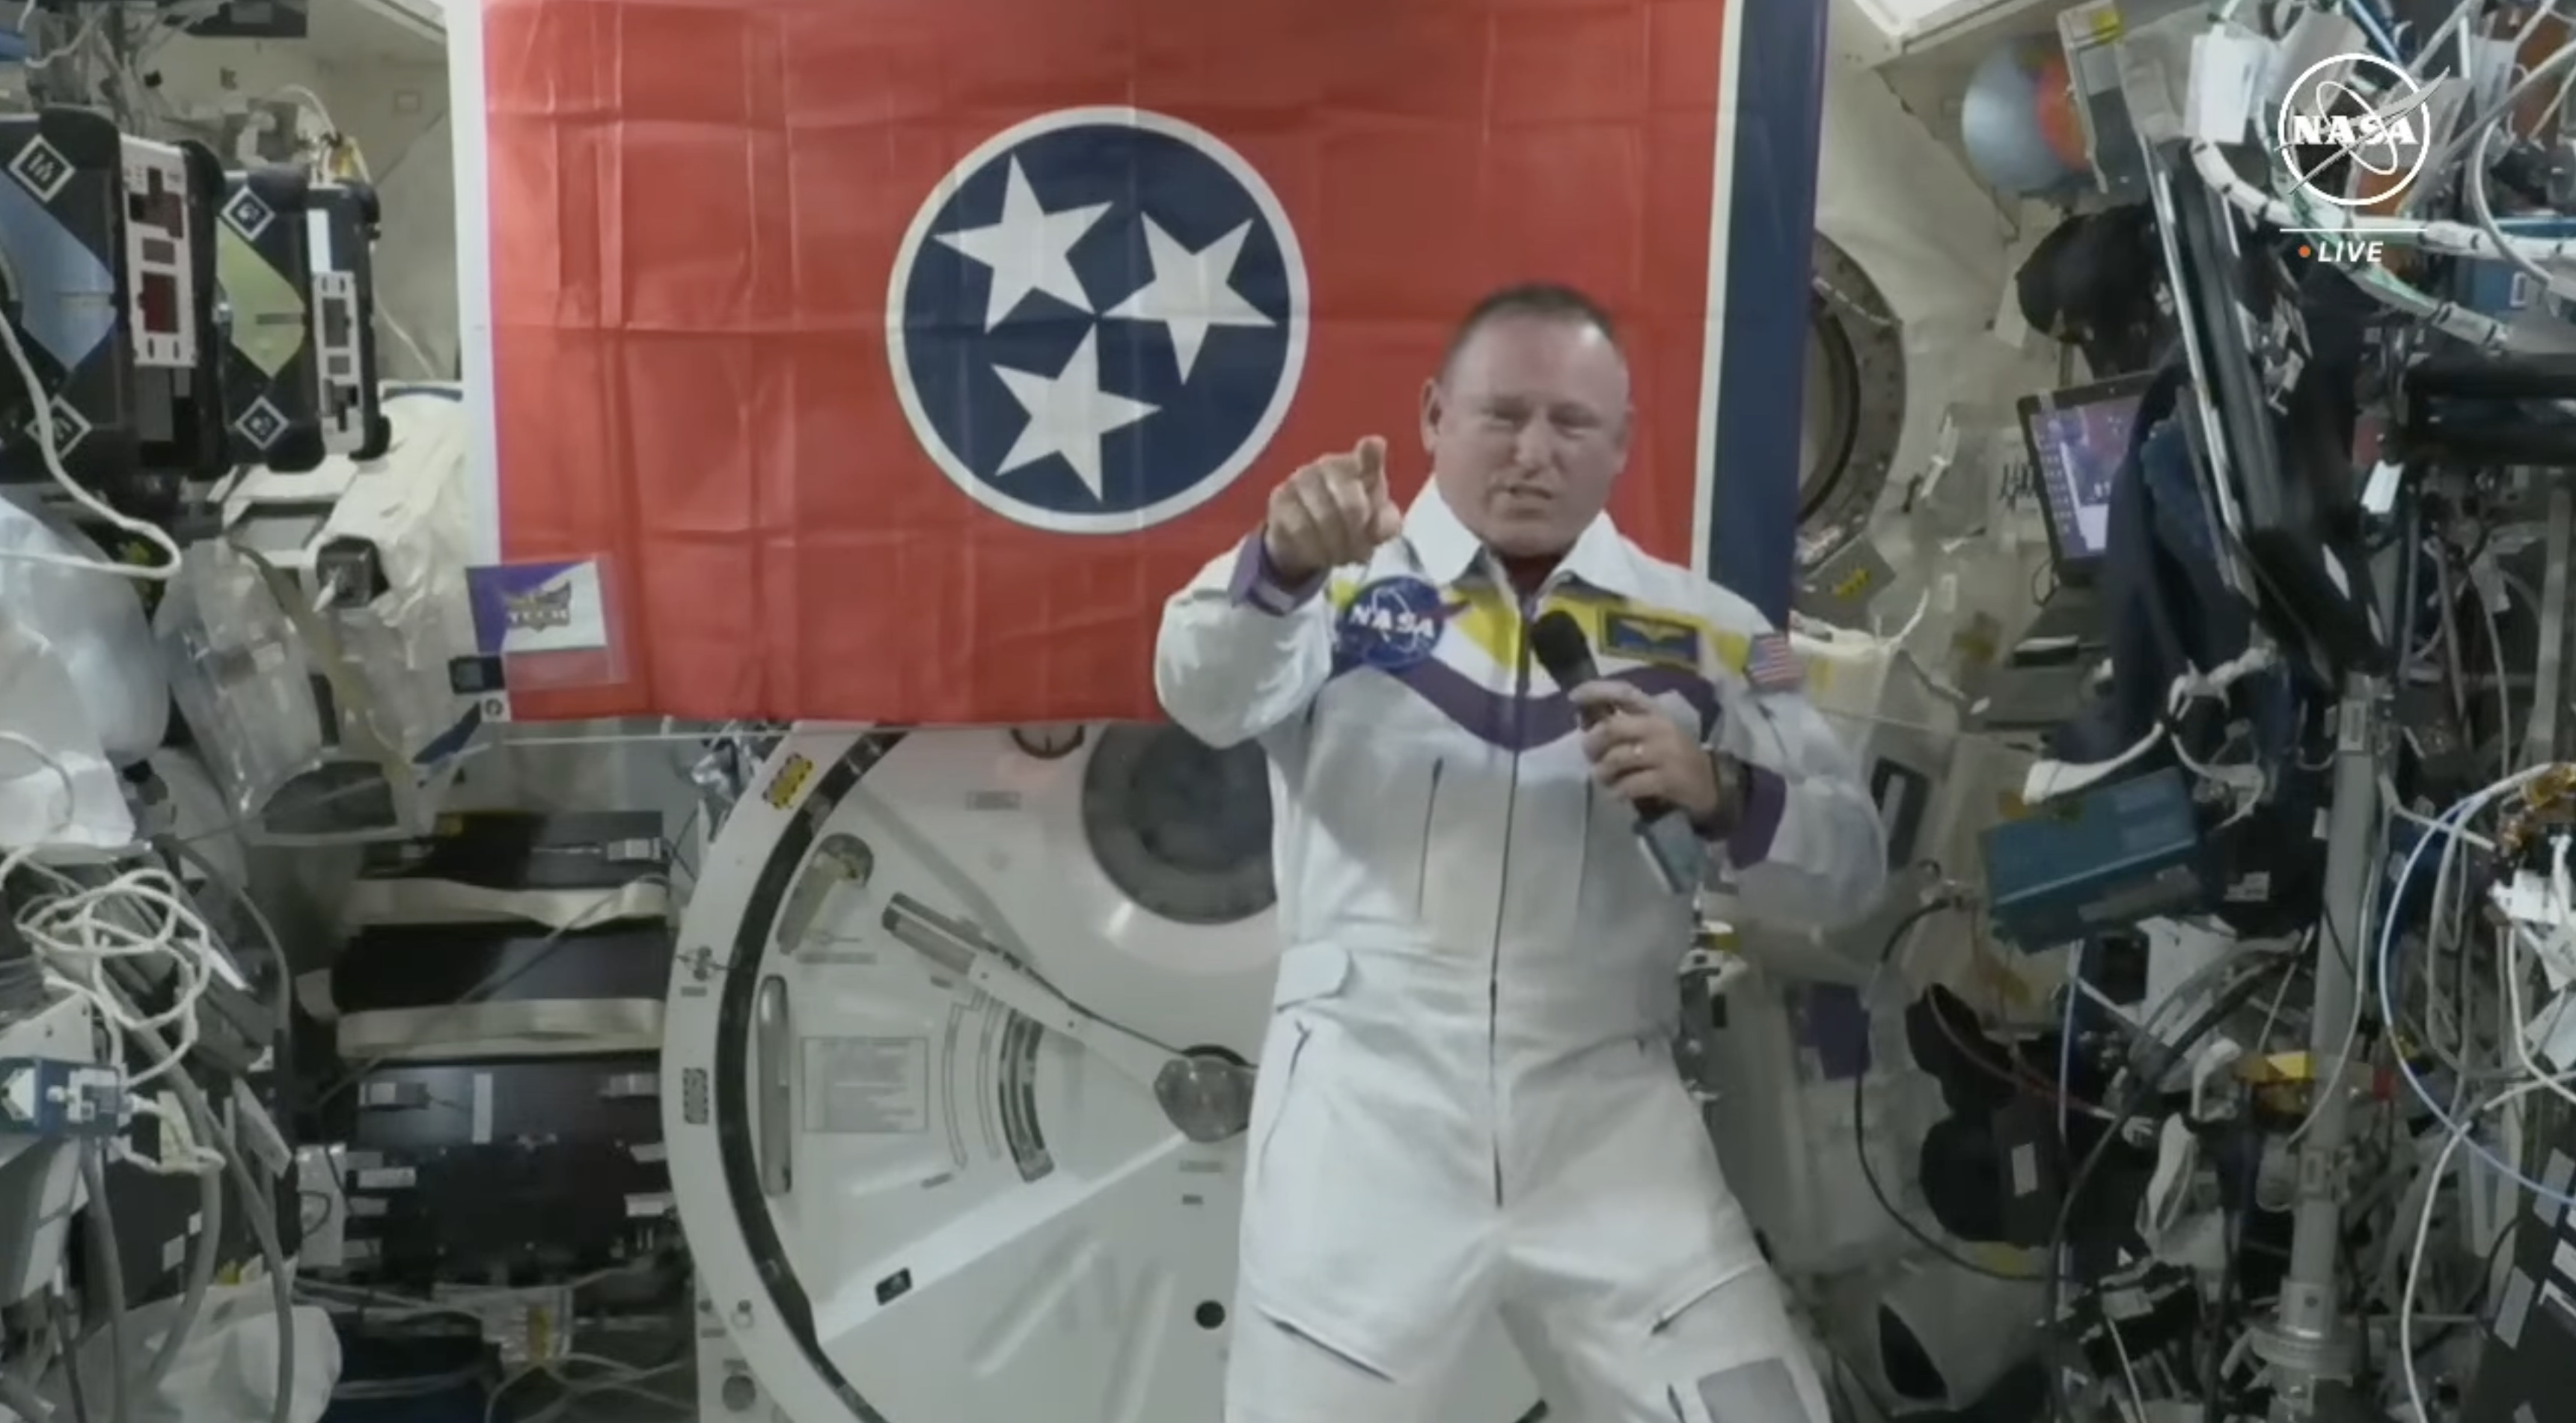 Tennessee Tech alumnus and trustee Barry “Butch” Wilmore appears in Tech’s signature purple and gold colors to speak with local students in a video chat from the International Space Station on June 11, 2024. A Tennessee Tech athletics decal is seen at left. Photo: Screengrab of live event via NASA TV. 